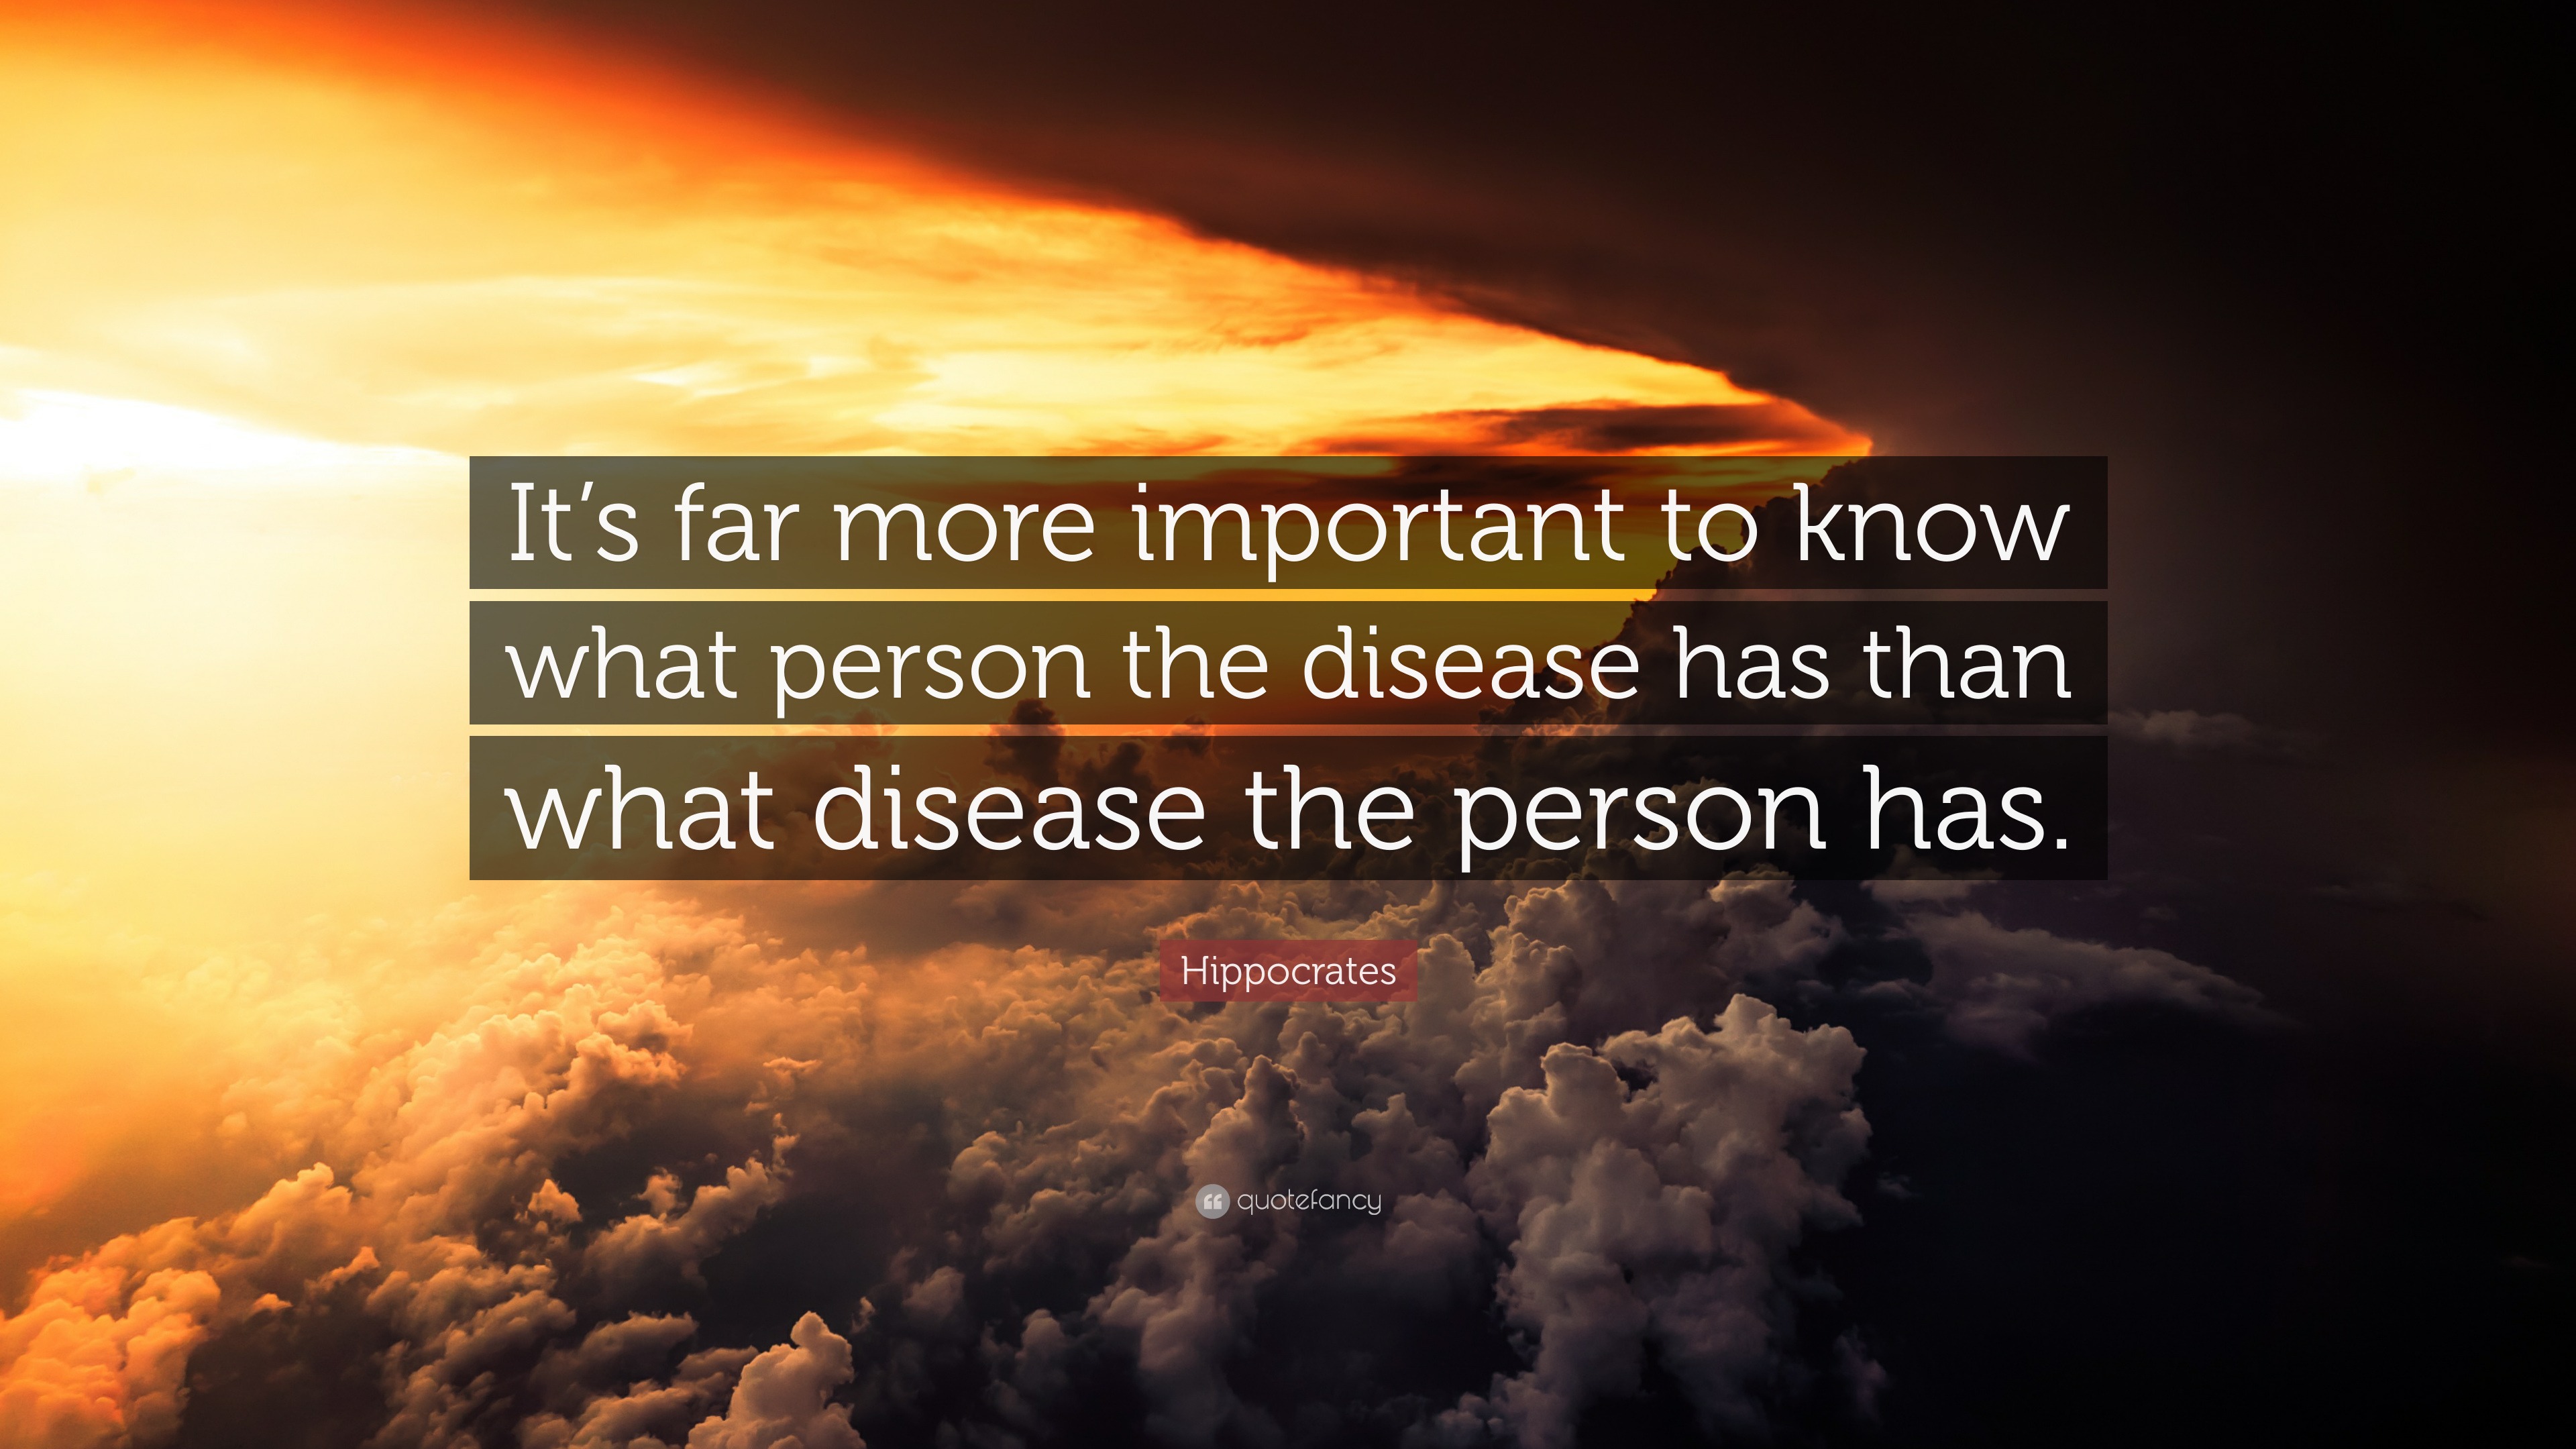 Hippocrates Quote: “It’s far more important to know what person the